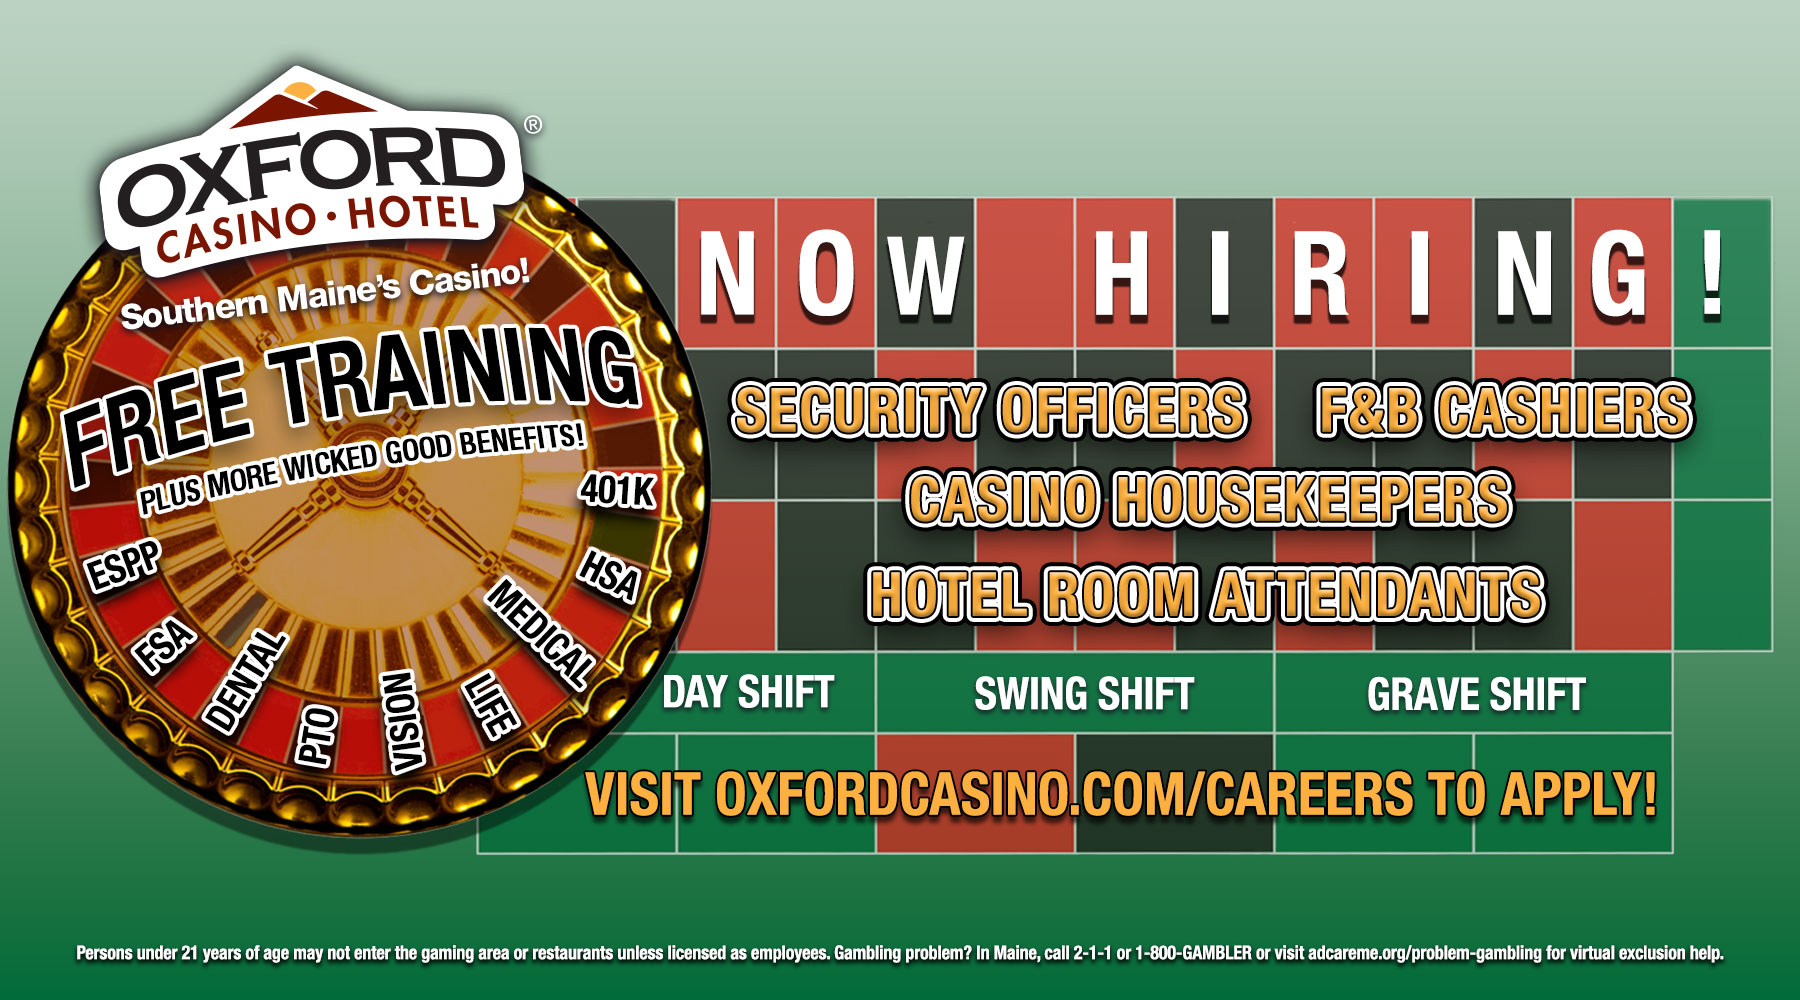 Now Hiring at Oxford Casino Hotel